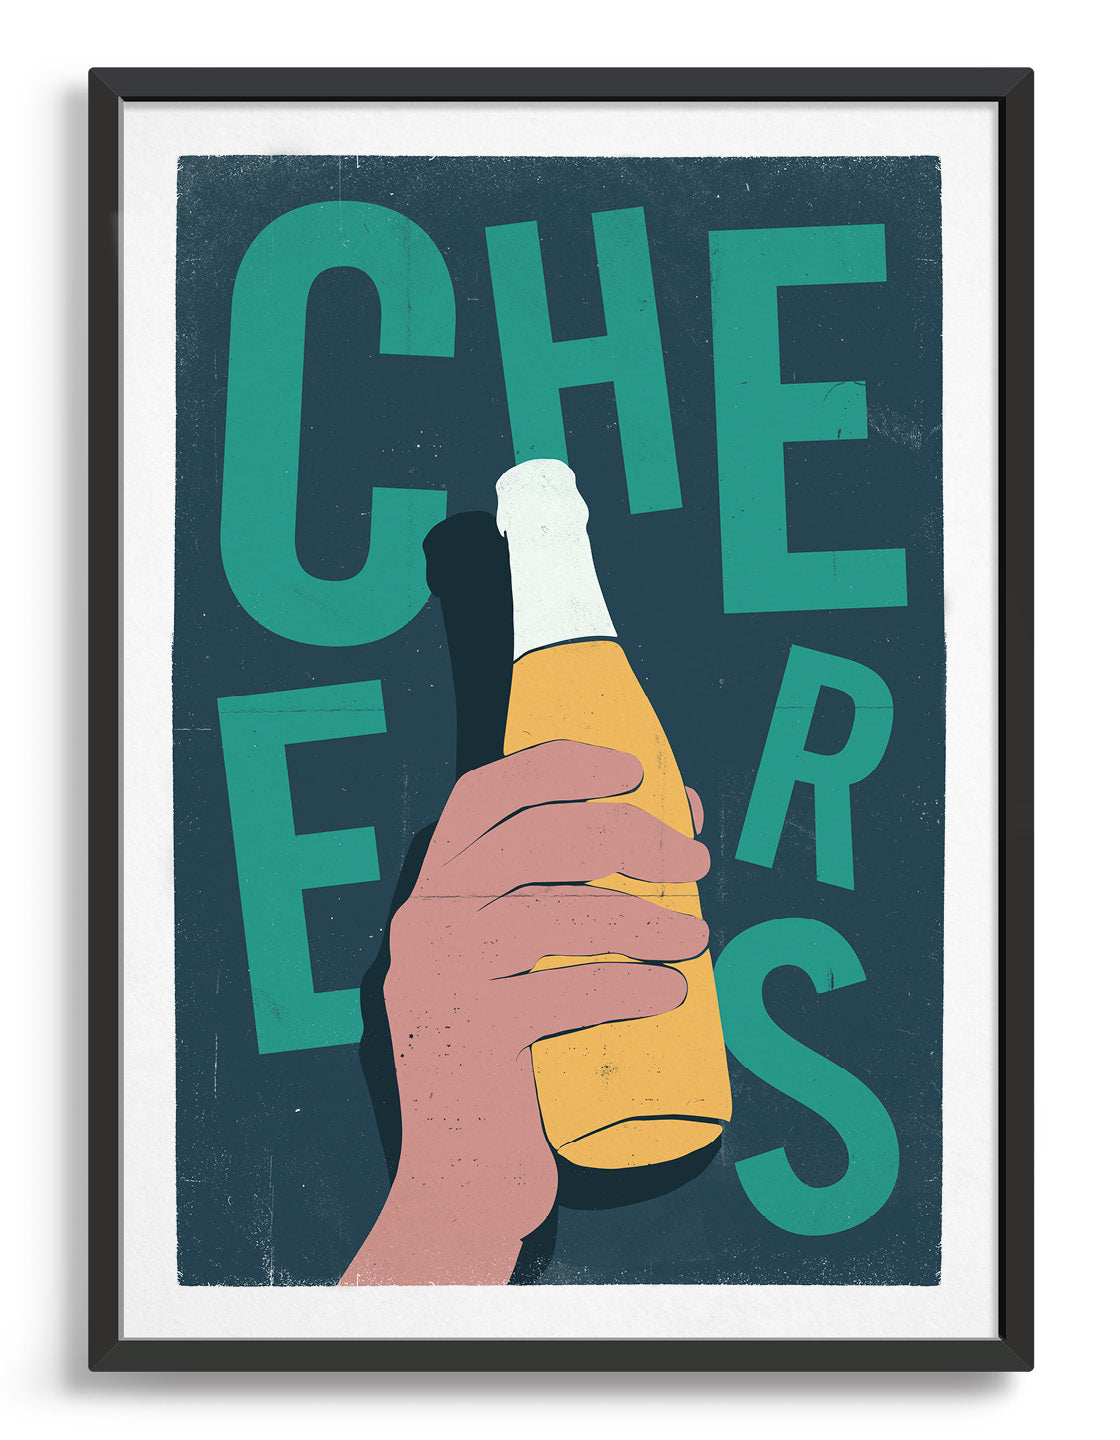 Print depicts a hand holding a bottle of beer in a 3d effect over text which says cheers in green type against a dark green background